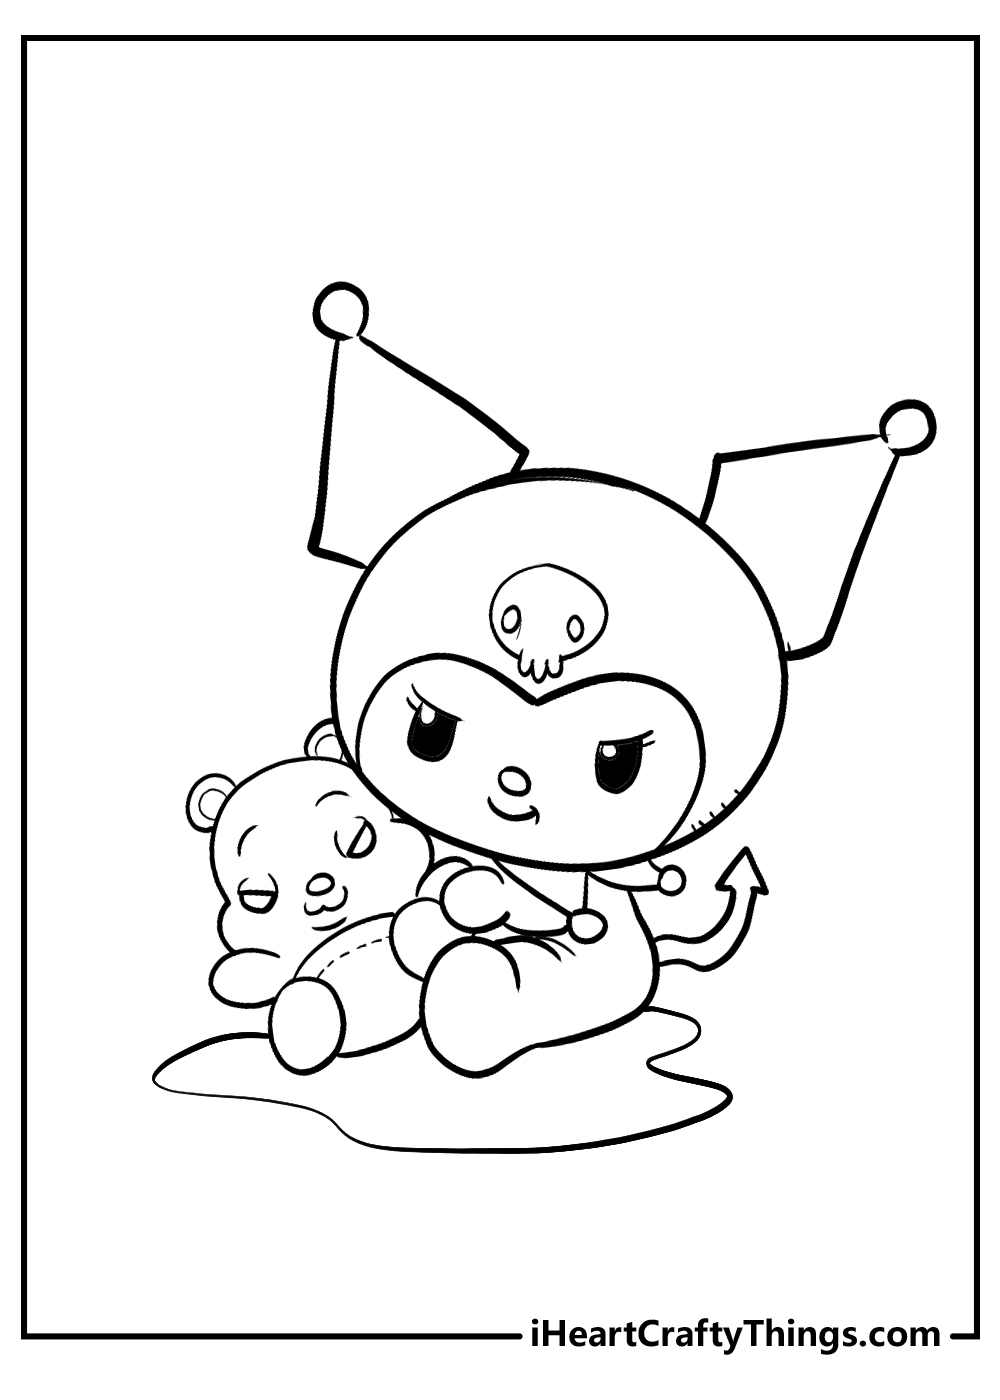 kuromi coloring pages free download